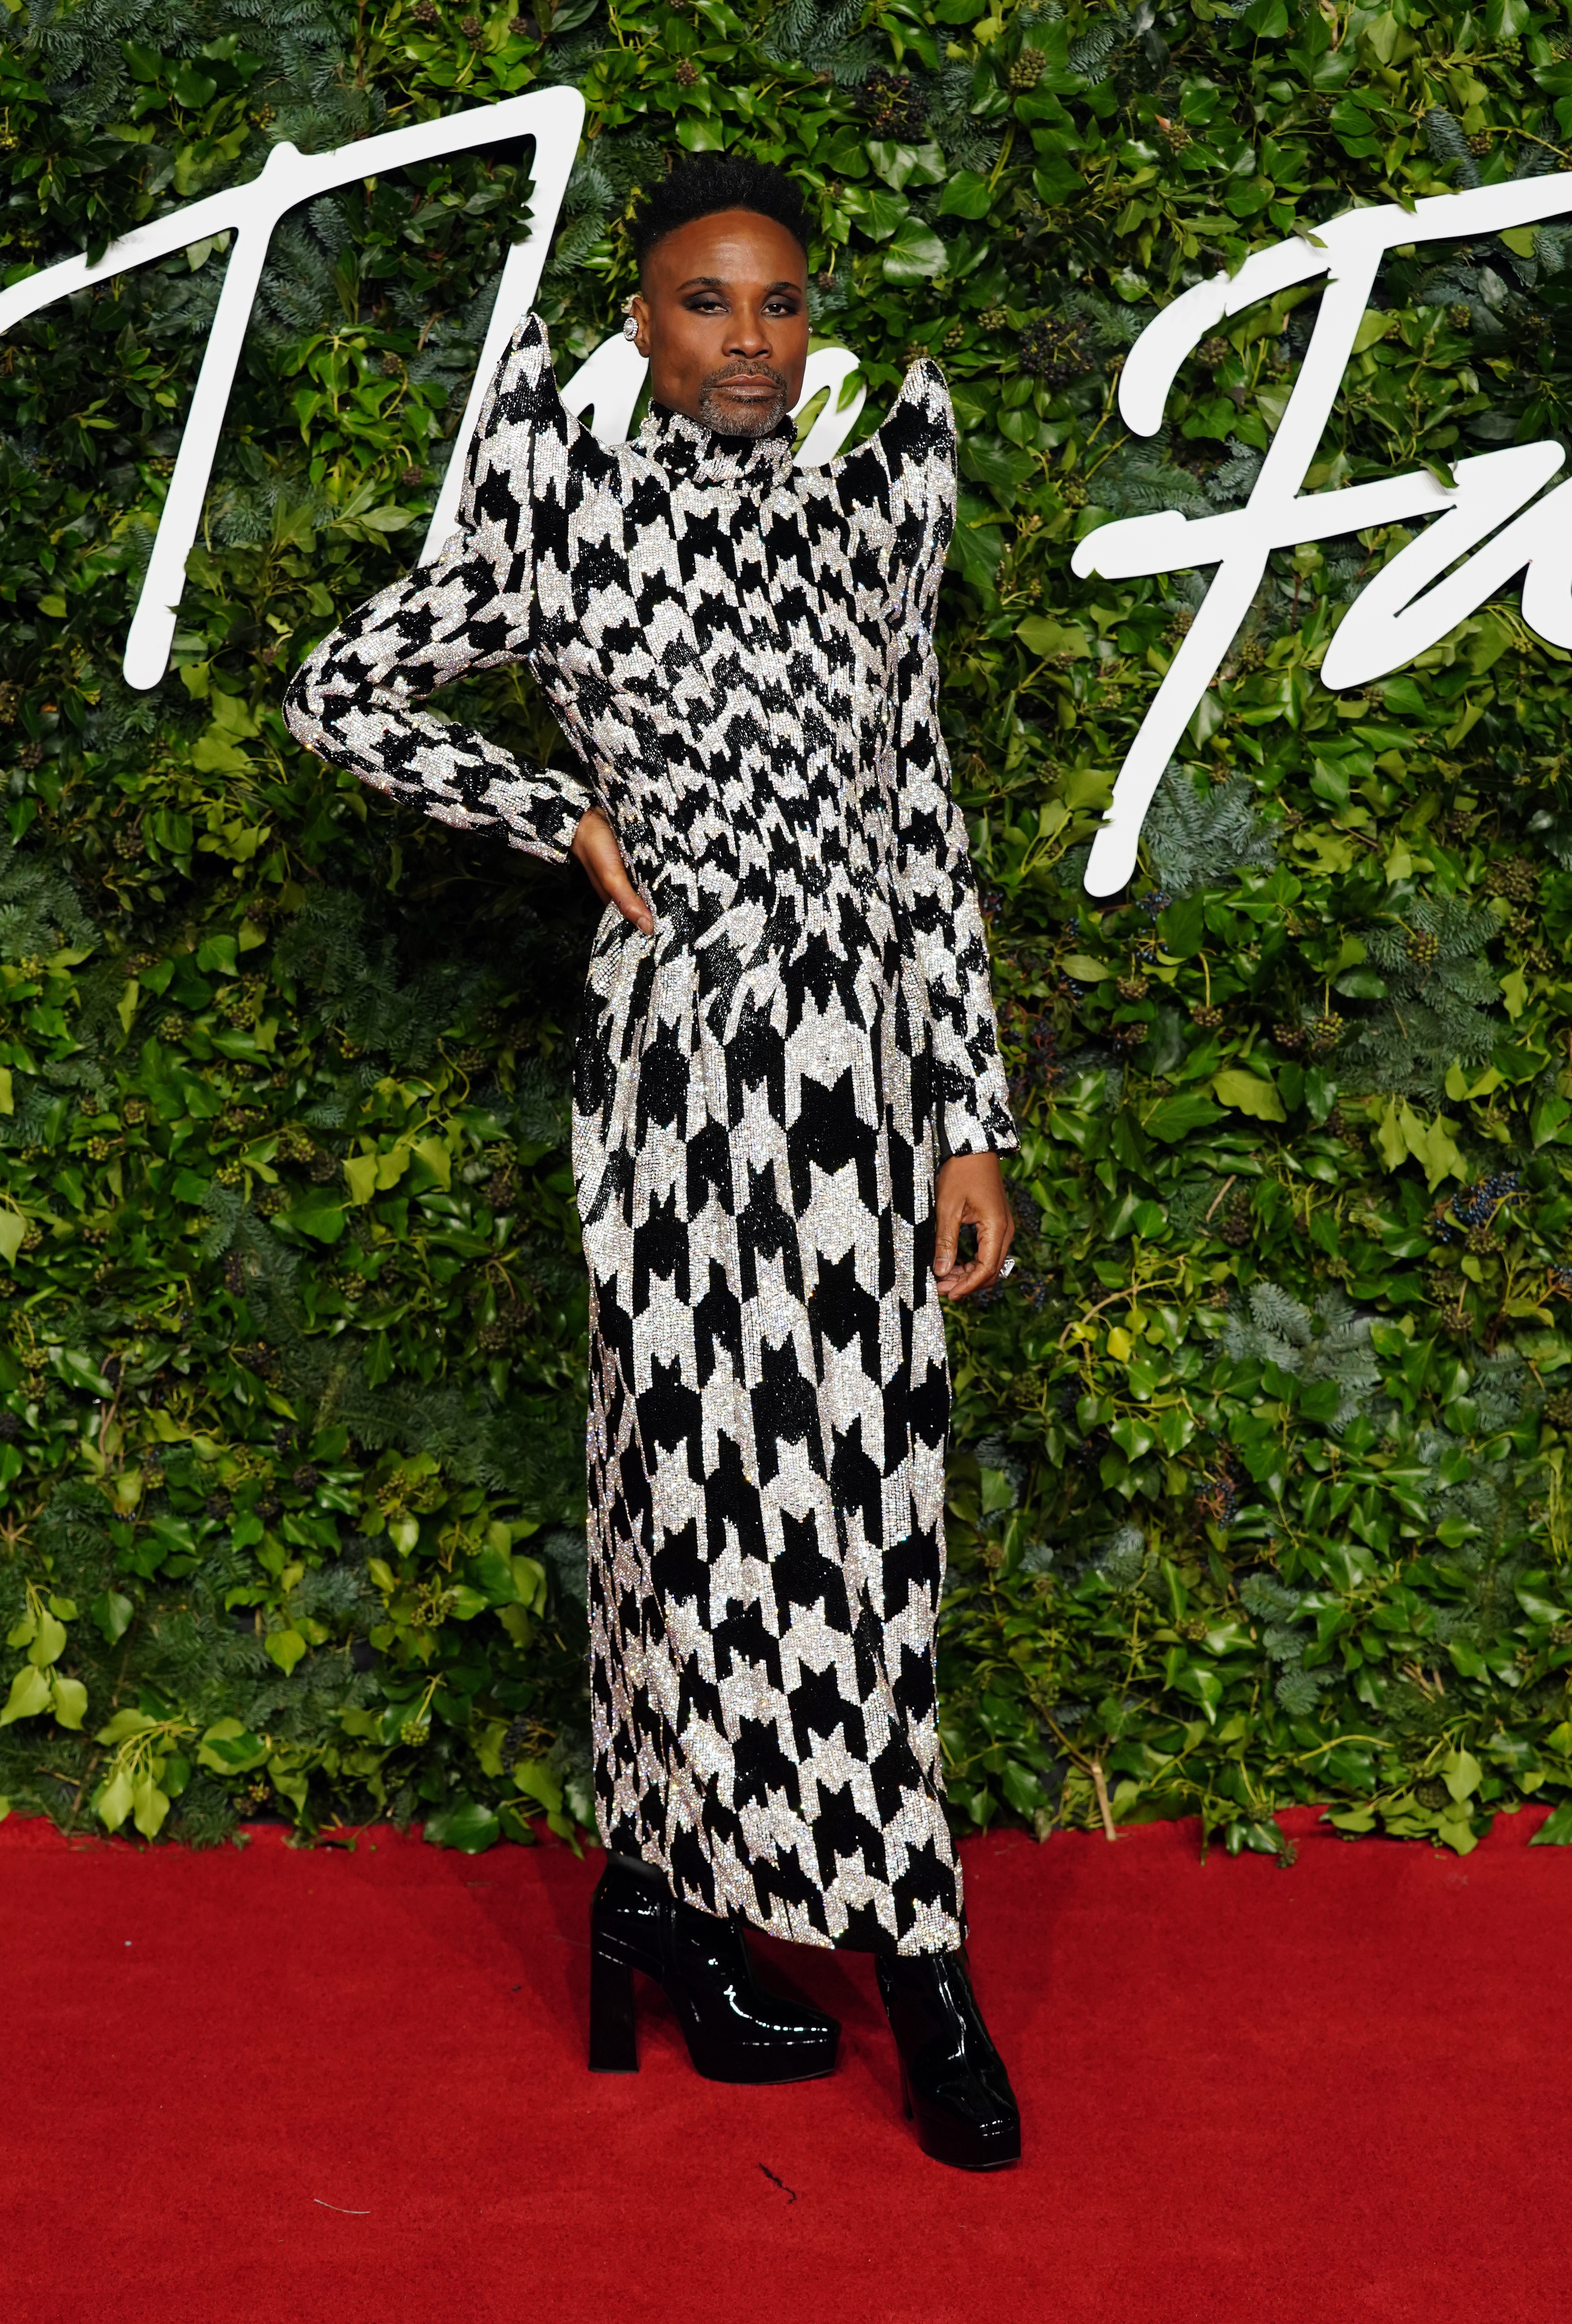 Billy Porter attending the Fashion Awards 2021